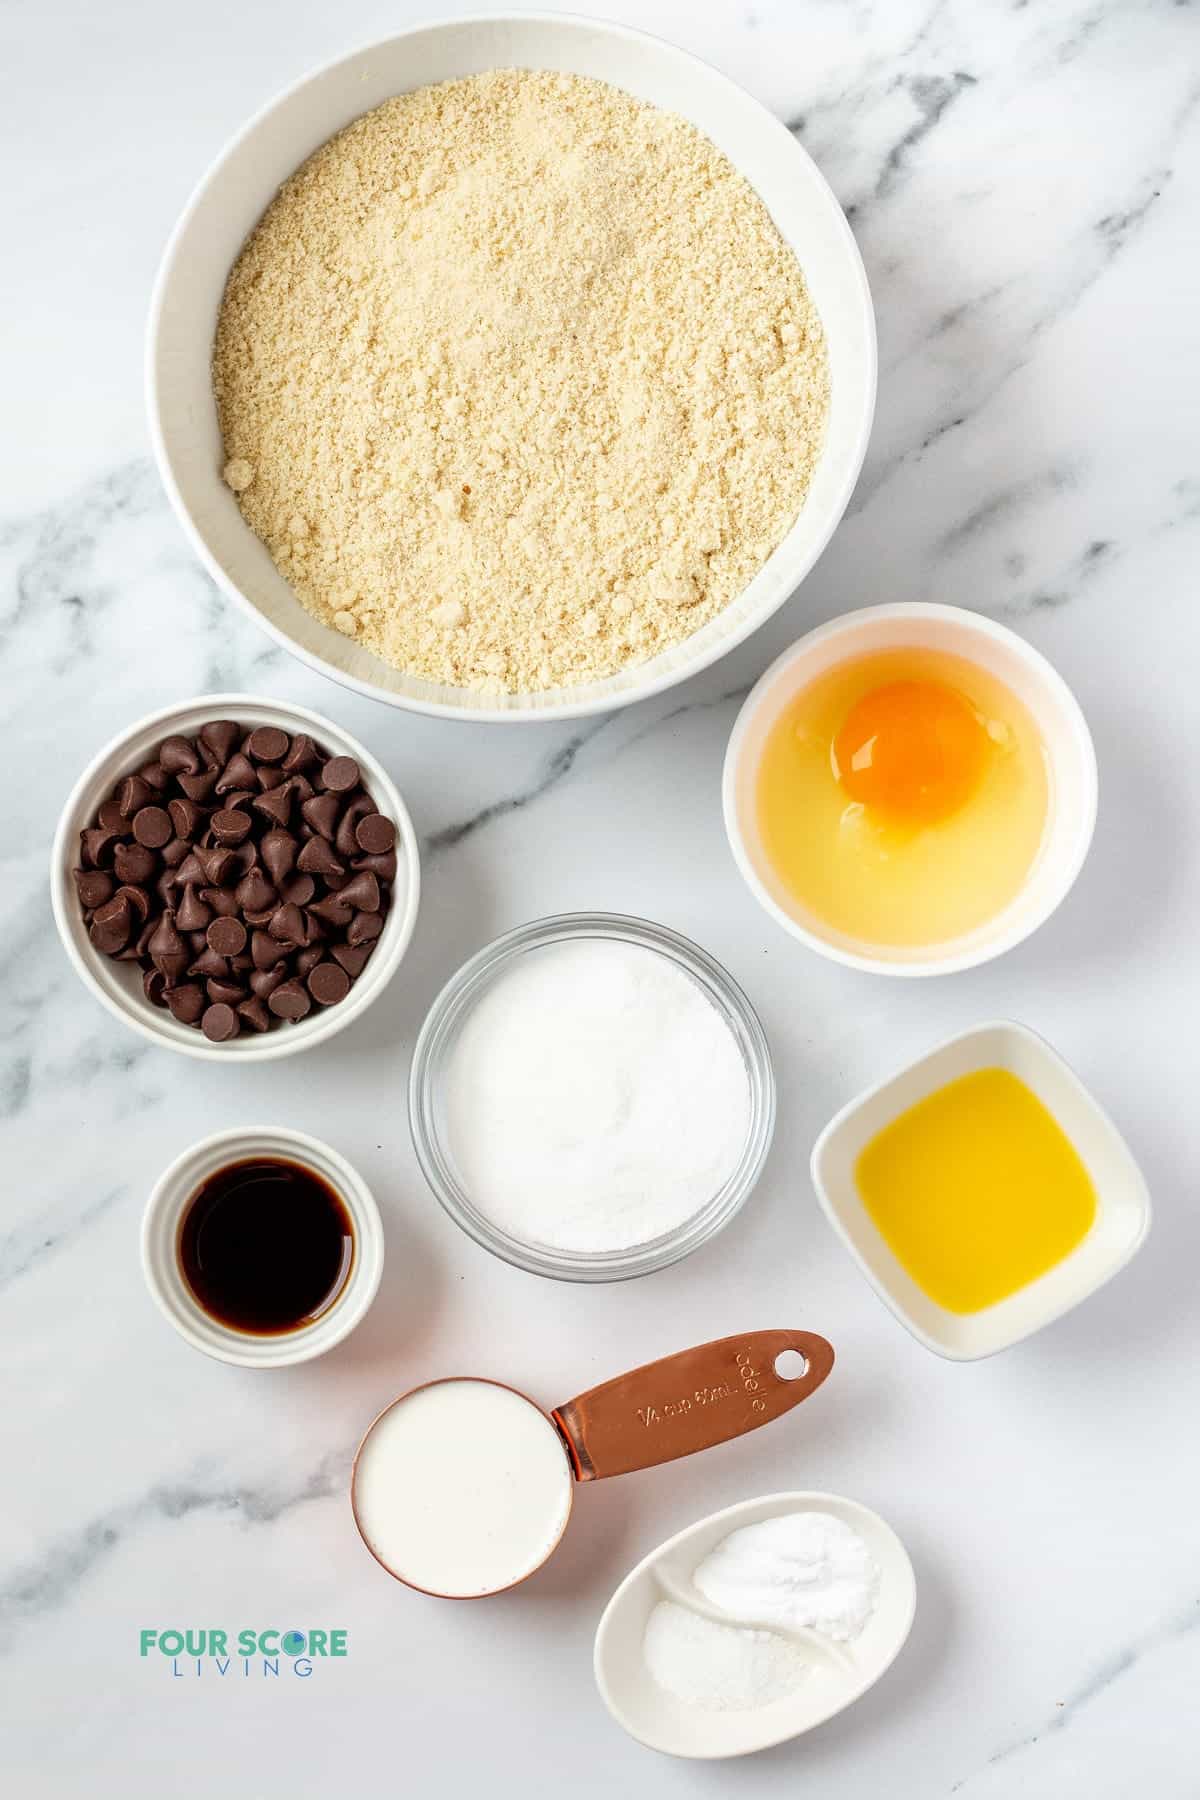 The ingredients for almond flour scones including egg, and chocolate chips